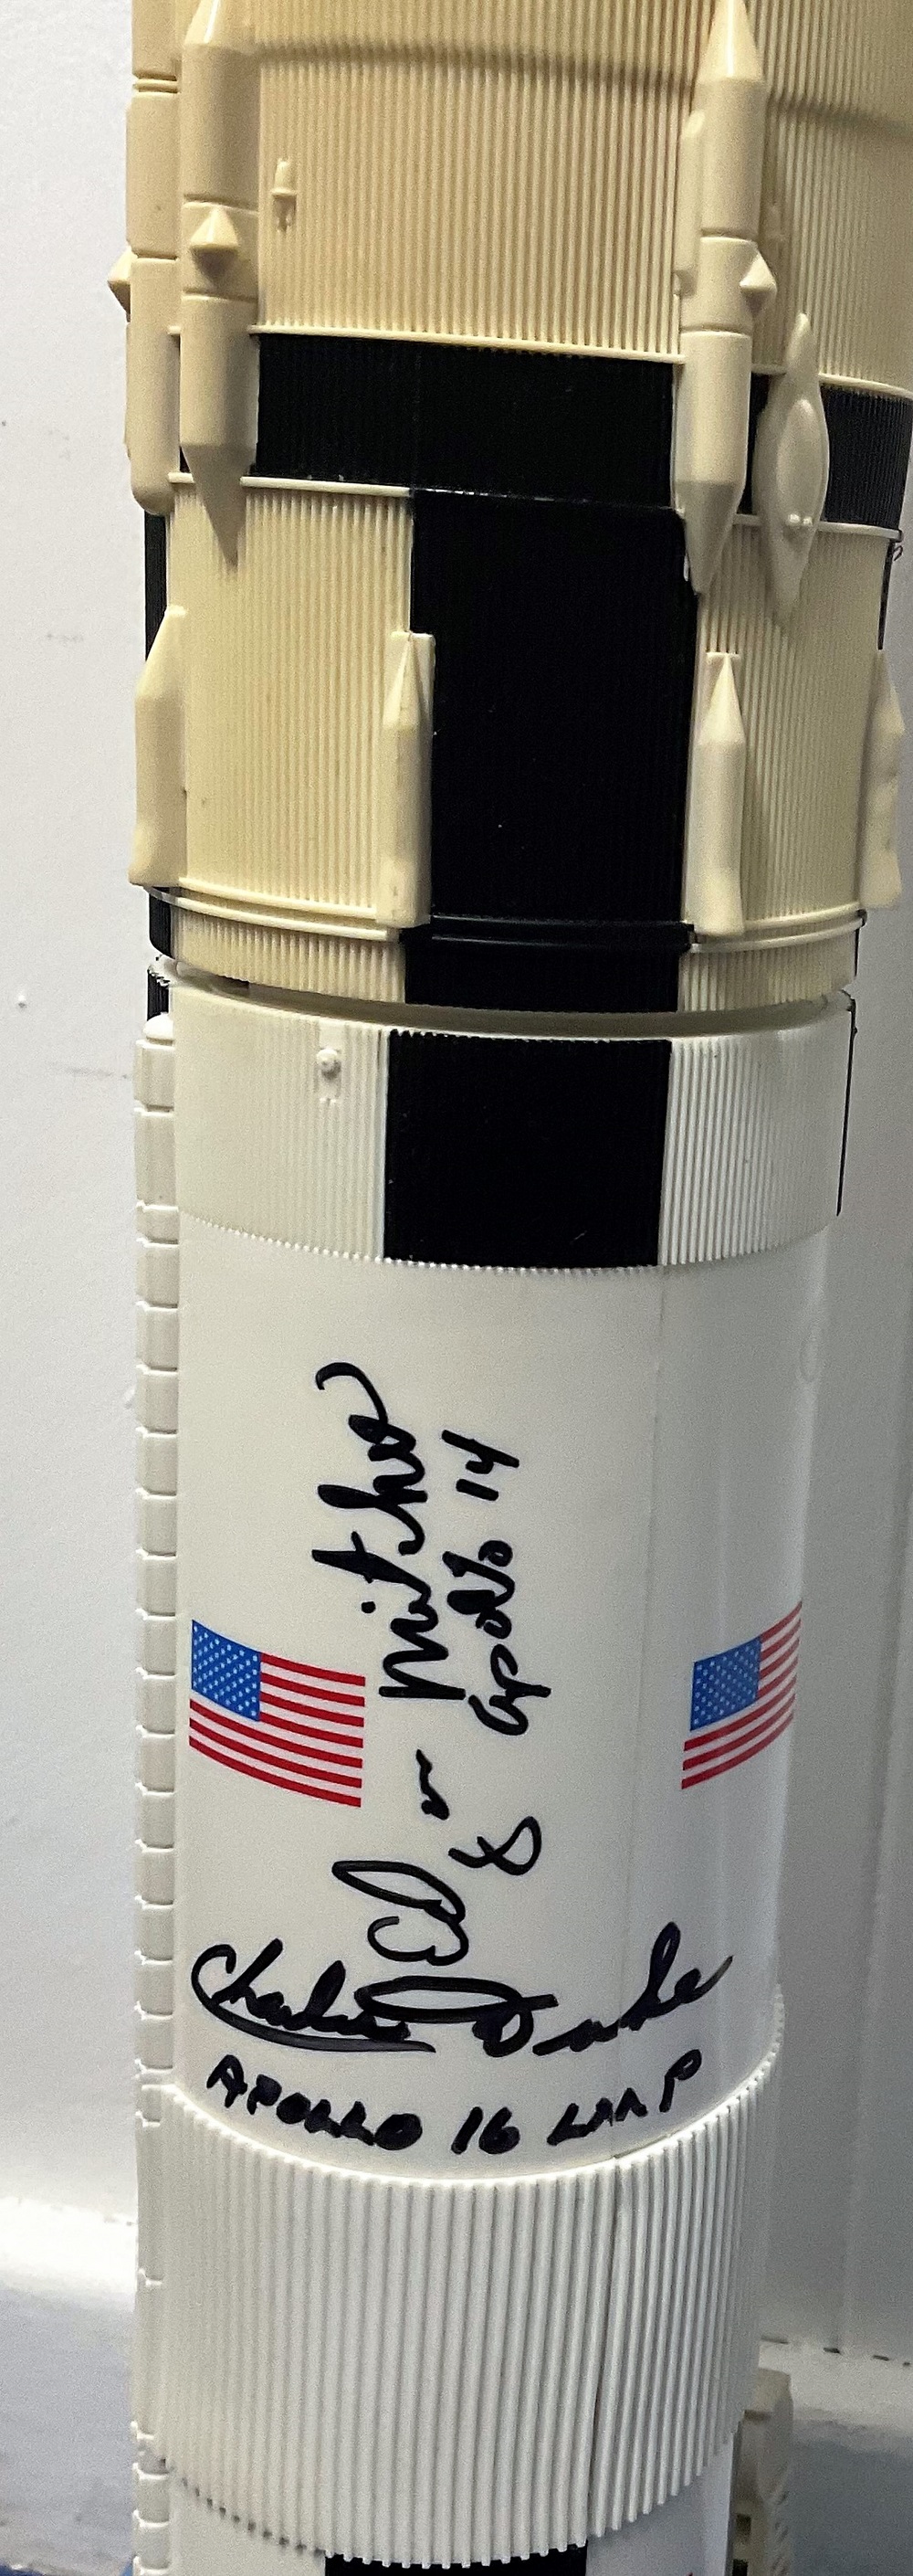 Space Voyagers Saturn 5 rocket model multi signed by Nasa astronauts Charles Drake, Ed Mitchell, - Image 3 of 7